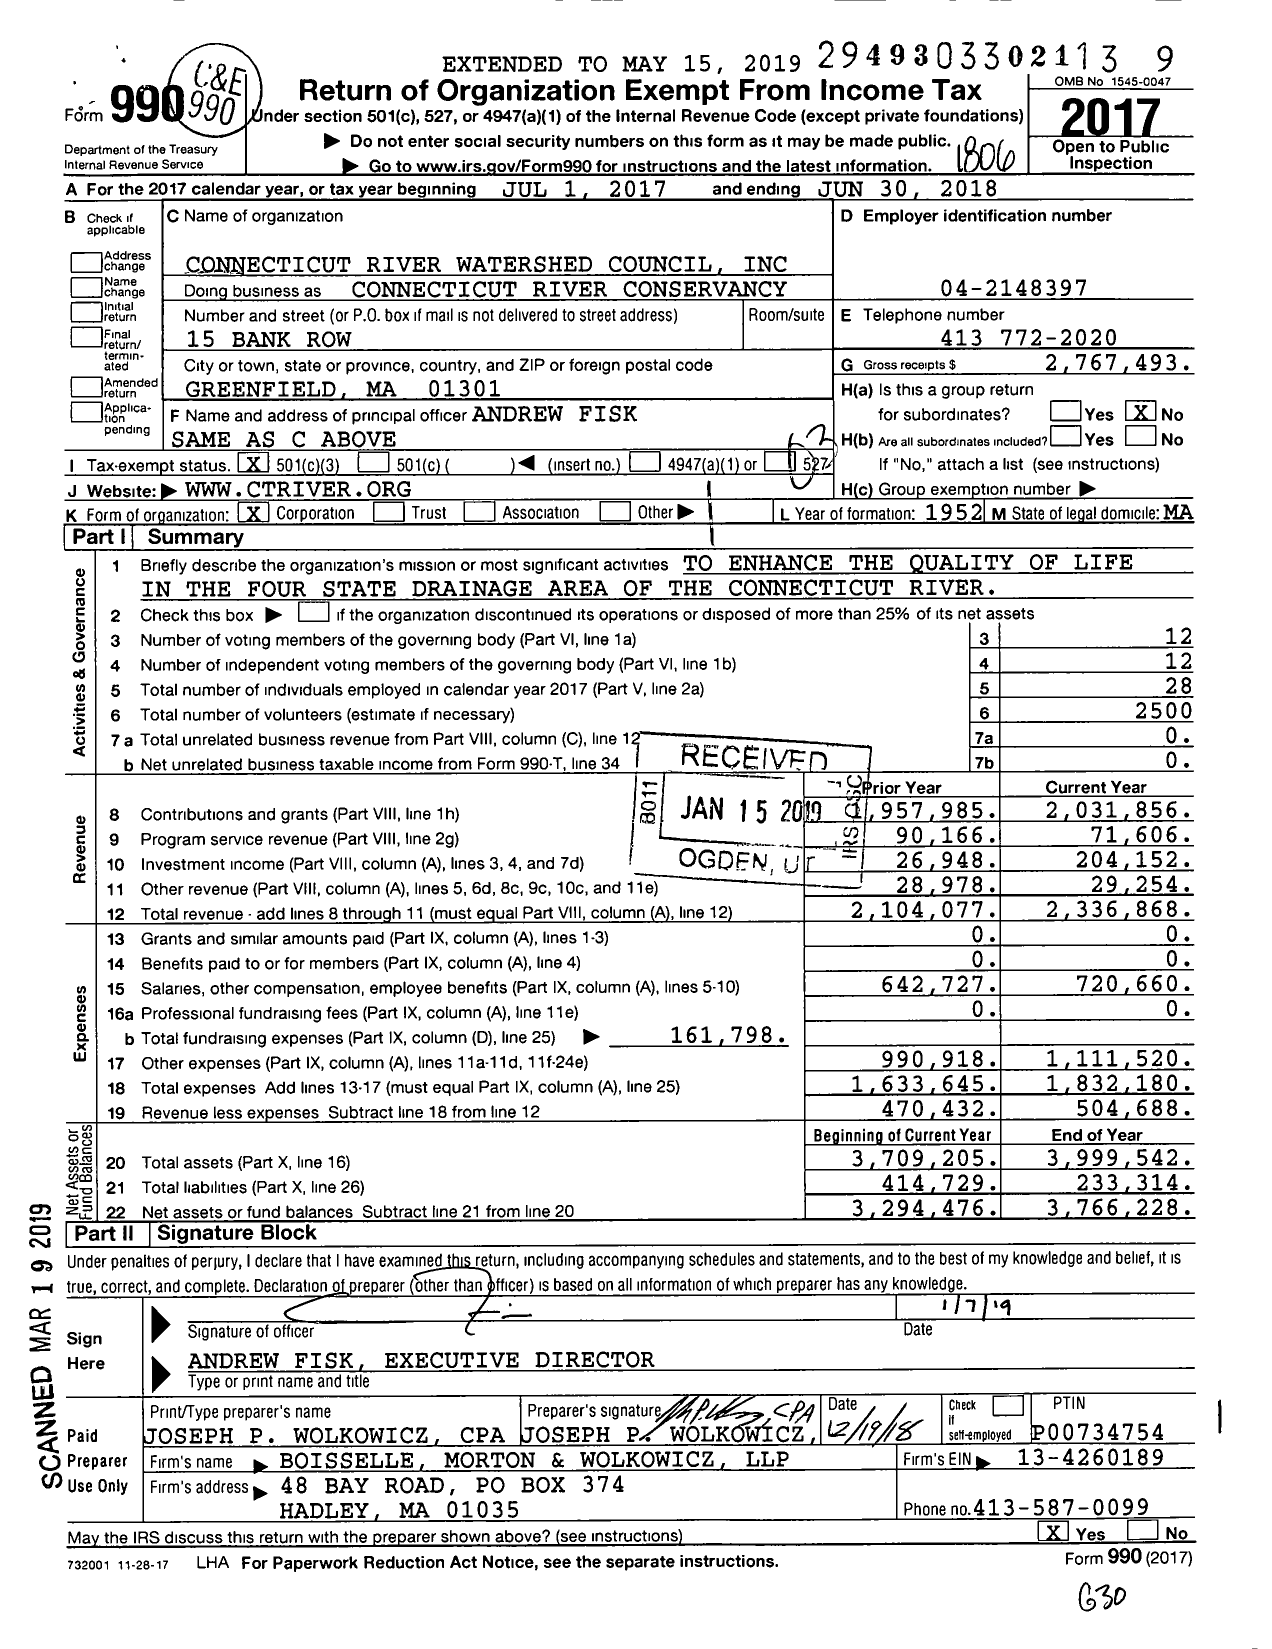 Image of first page of 2017 Form 990 for Connecticut River Conservancy (CRWC)